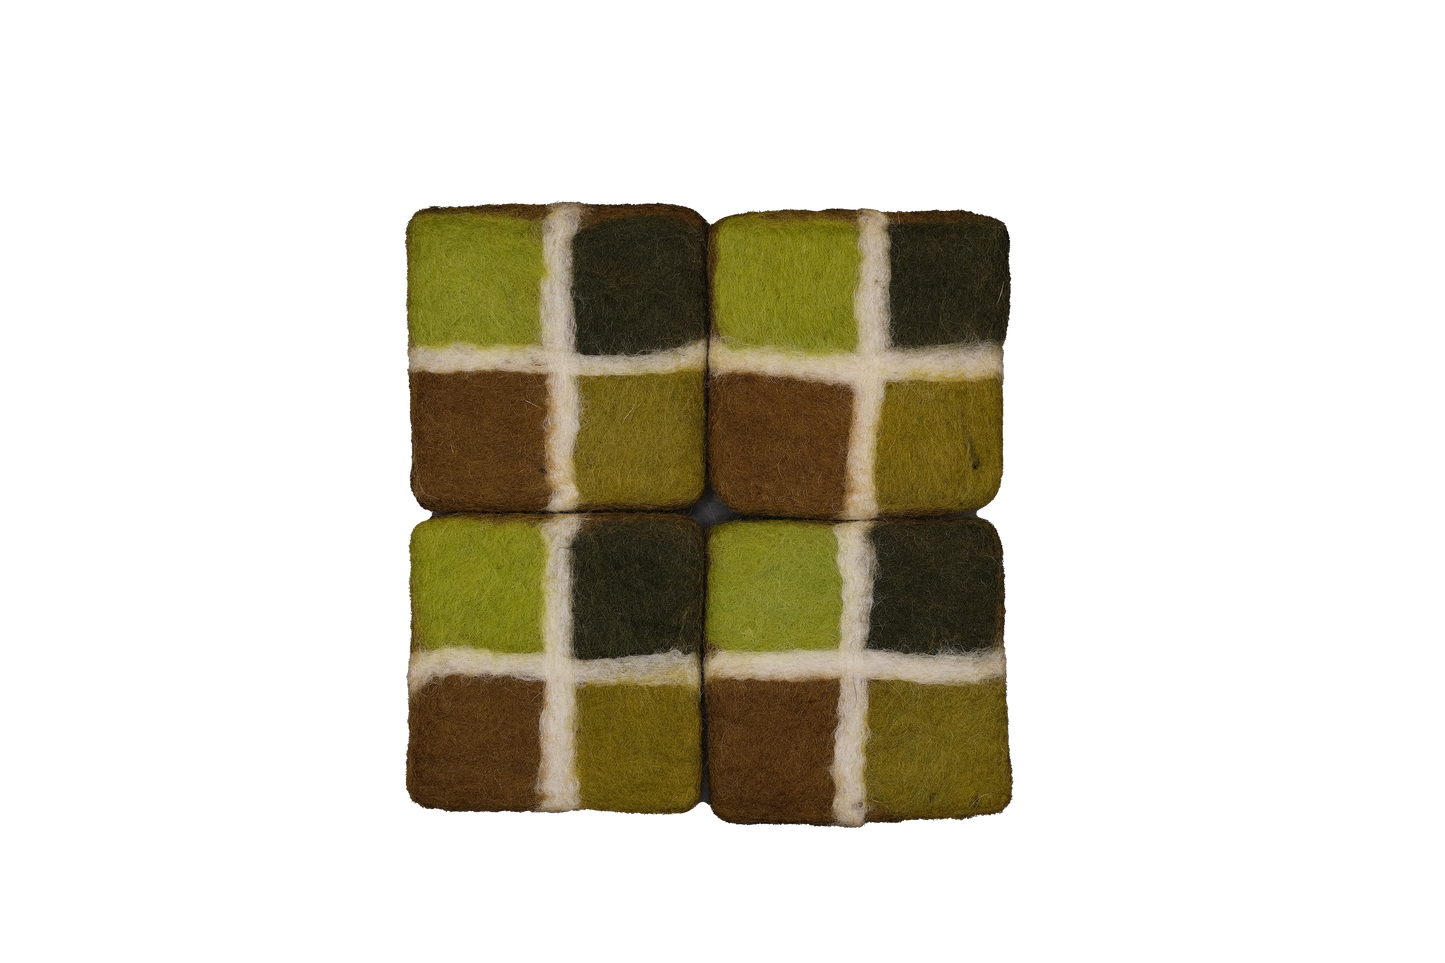 This Global Groove Life, handmade, ethical, fair trade, eco-friendly, sustainable, New Zealand wool felt, Rainforest green coaster set, was created by artisans in Kathmandu Nepal and will bring colorful warmth and functionality to your table top.